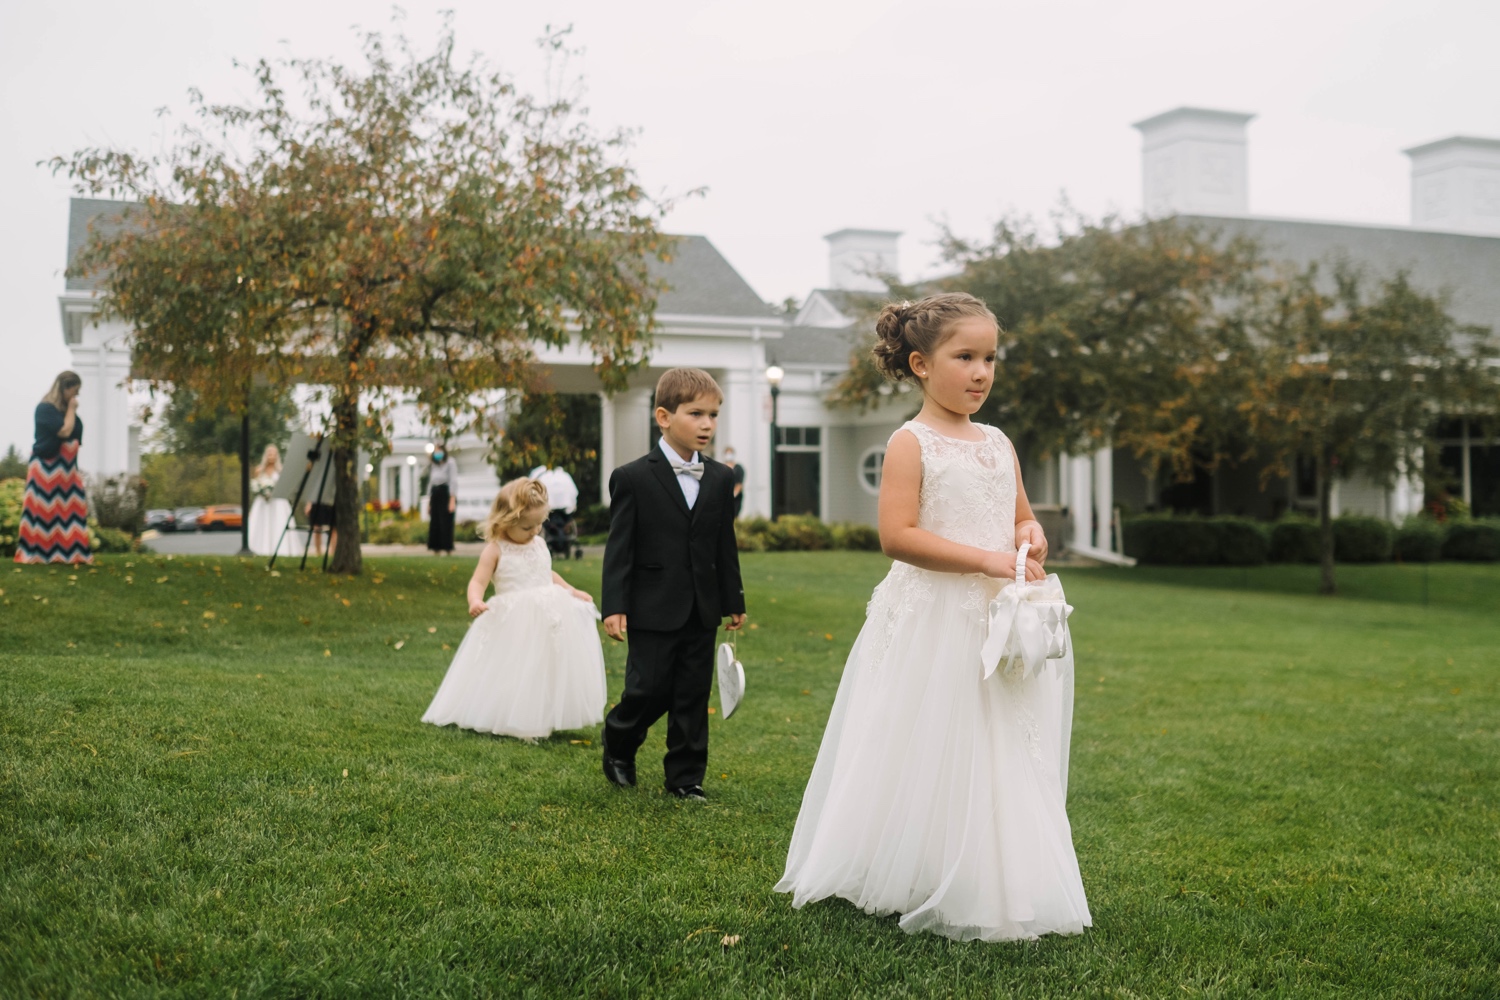 outdoor fall wedding at minnesota valley country club